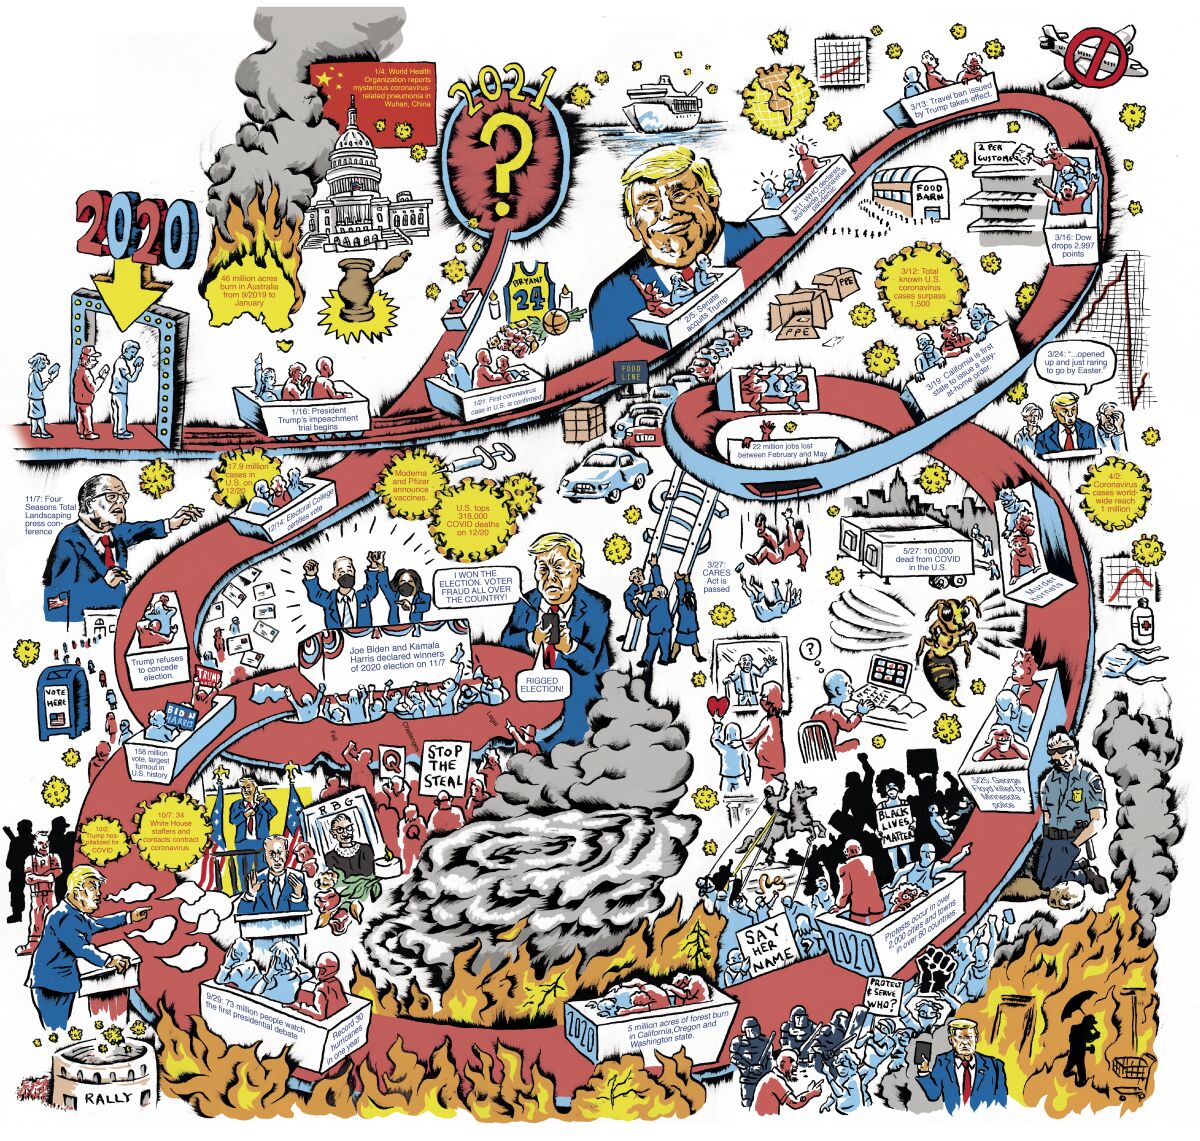 Illustrator Kevin C. Pyle's graphic look at what happened in 2020.